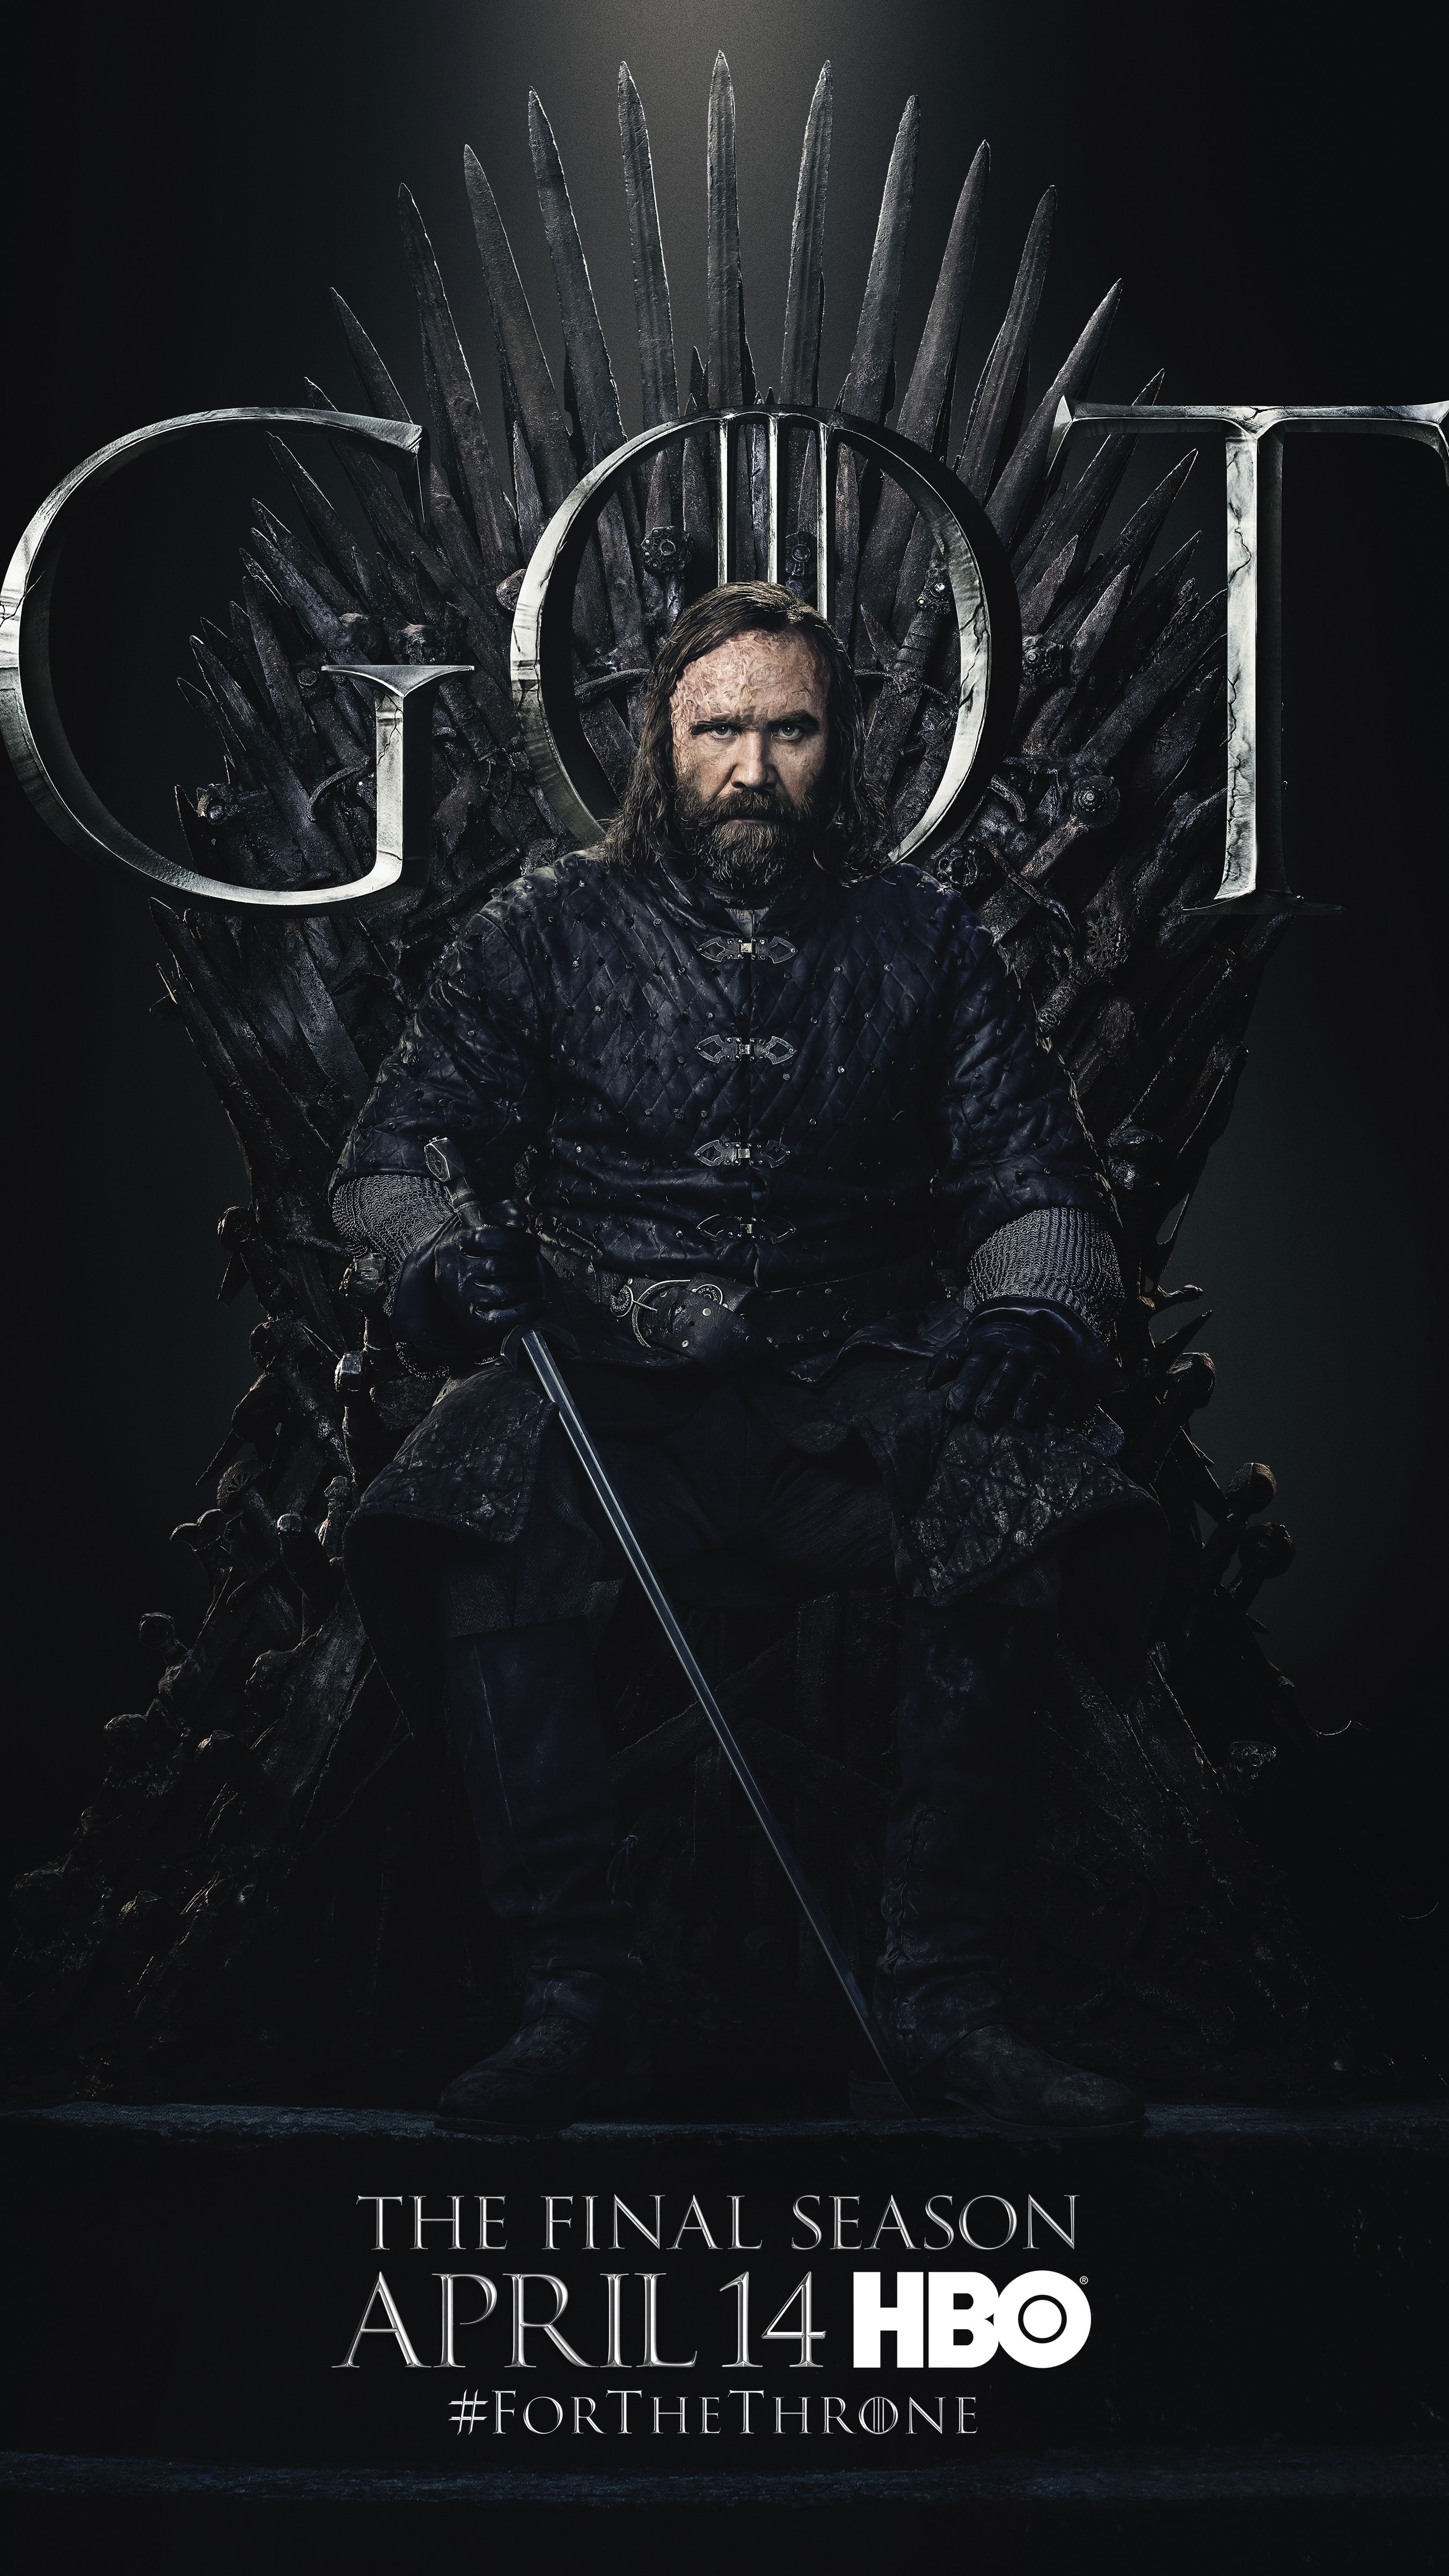 New Game of Thrones Posters Hint at Controversial Character